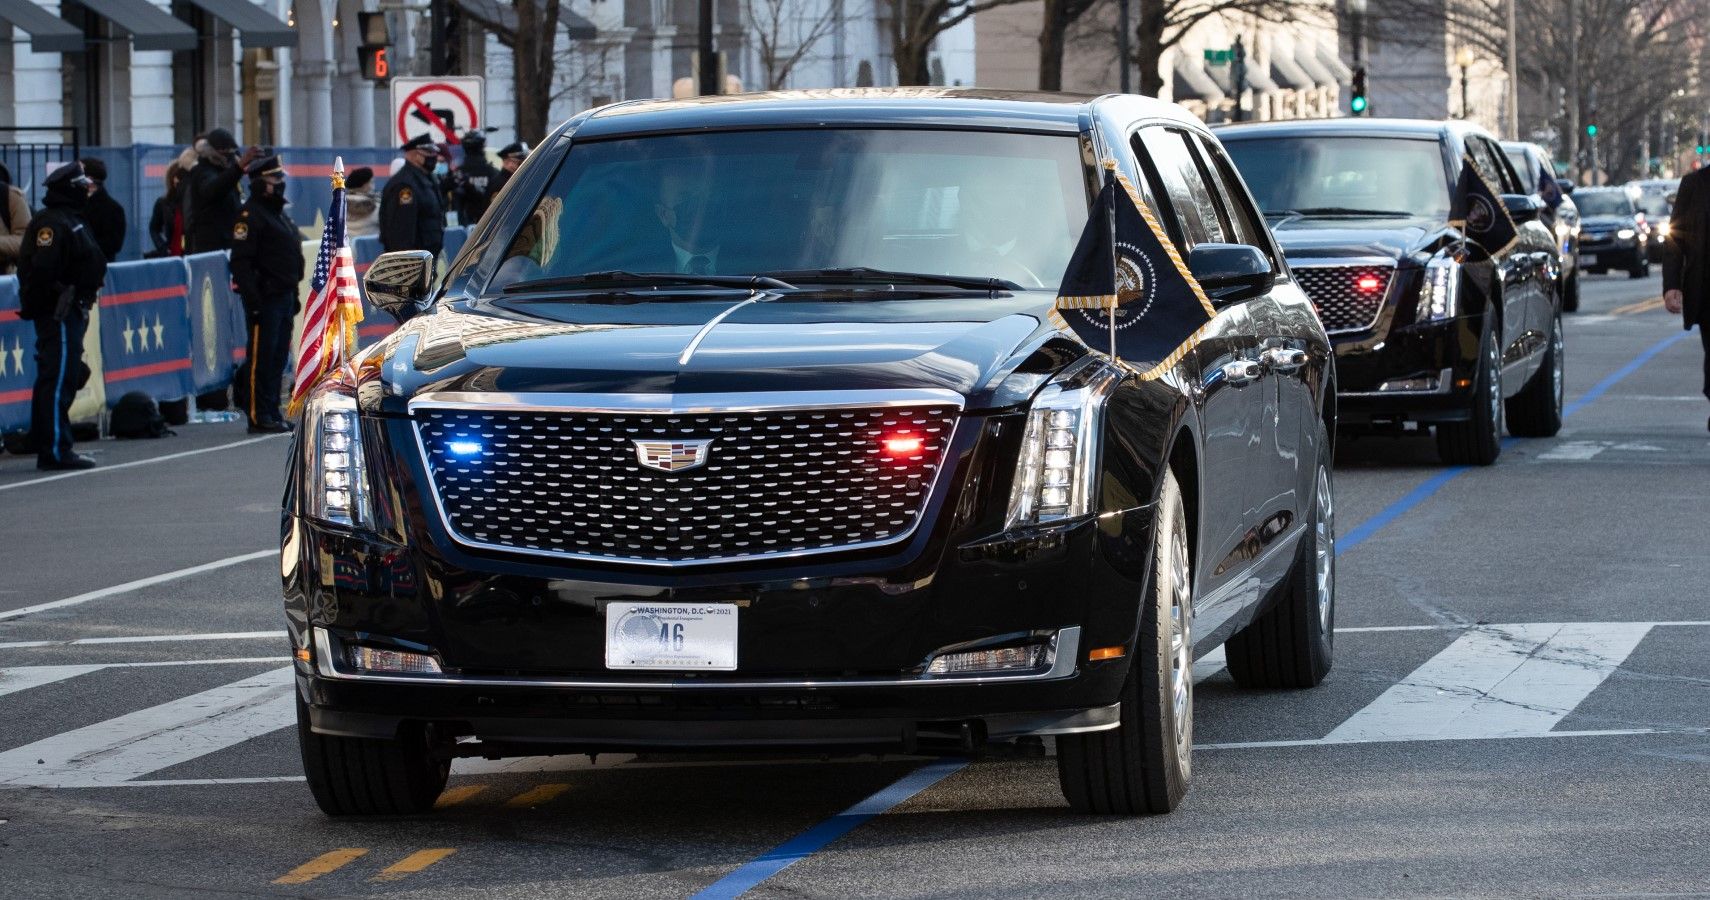 "The Beast" Presidential limousine